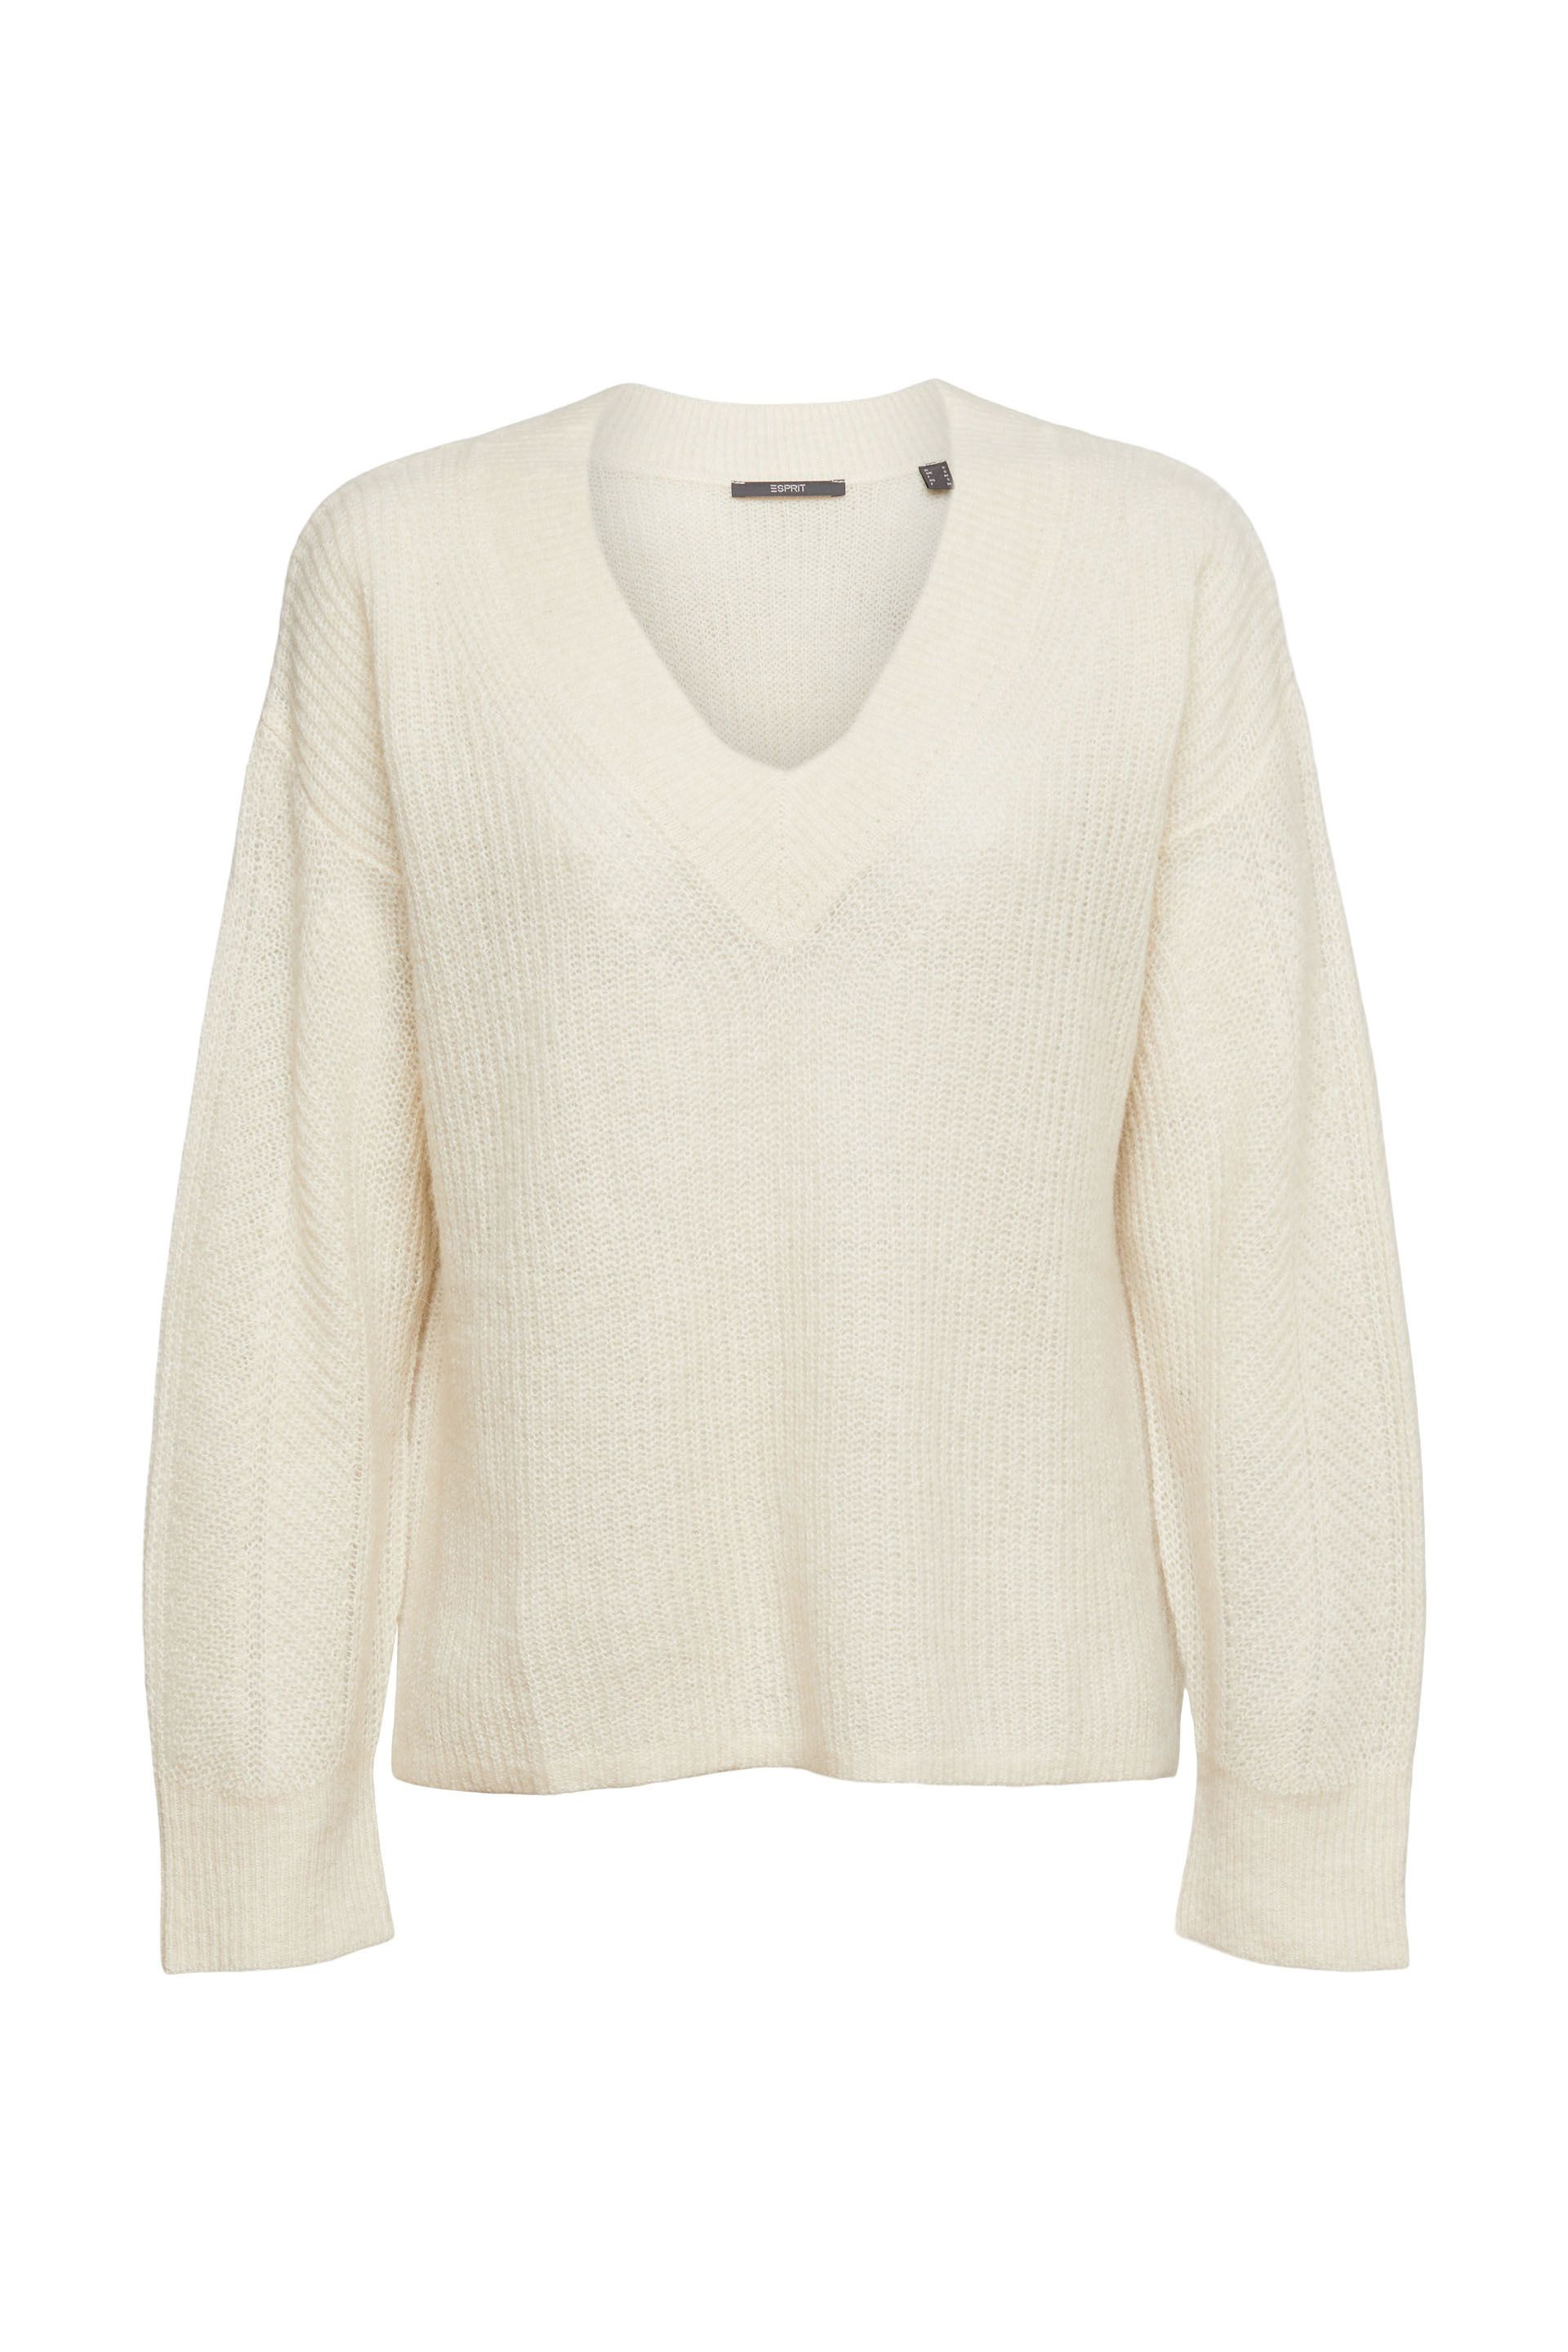 Pullover con scollo a V, Beige, large image number 0